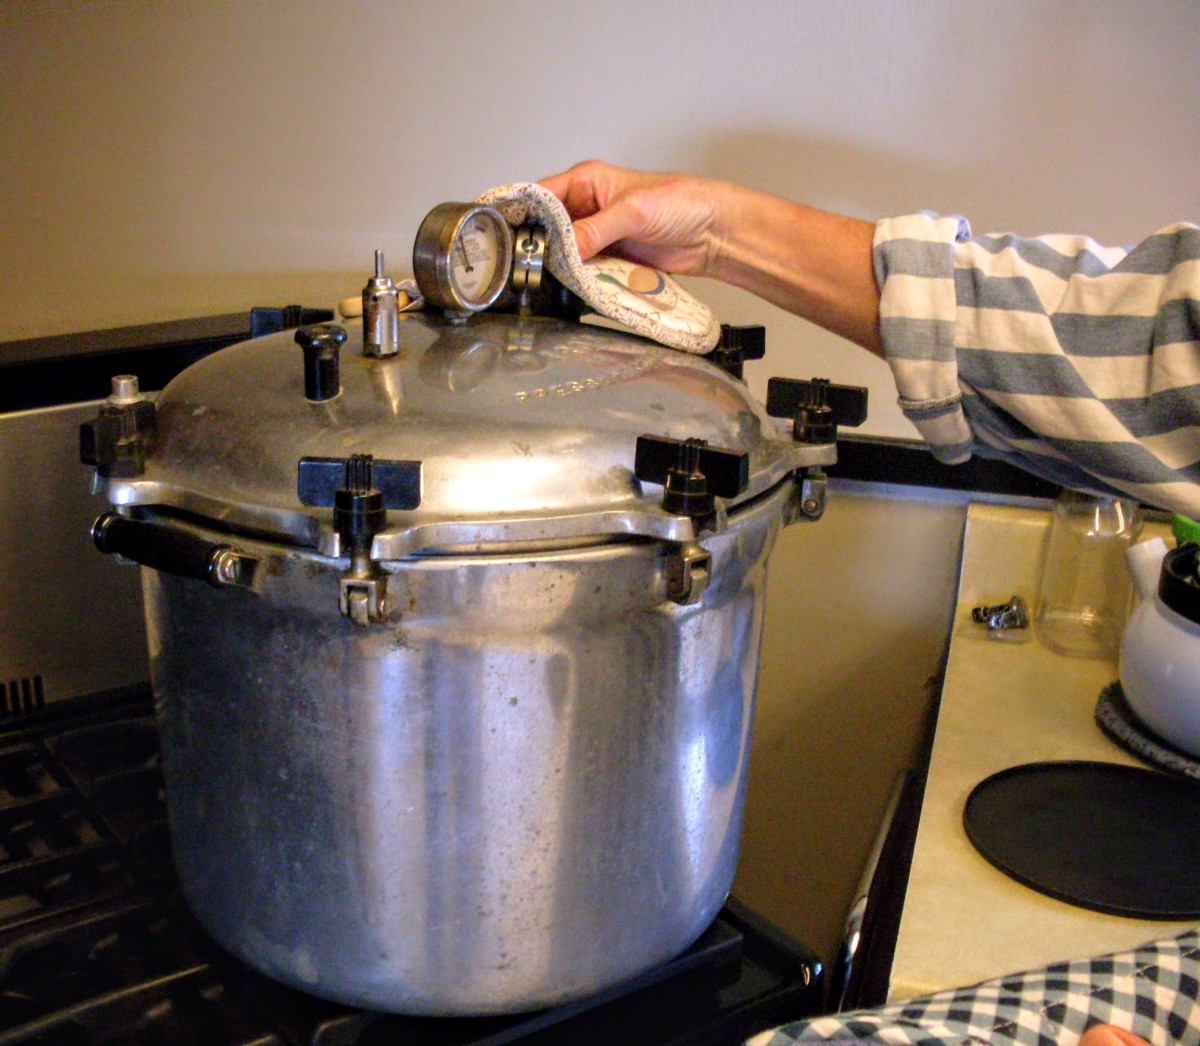 Once the pressure gauge has returned to zero pounds, carefully remove the weight and lid of your canner.